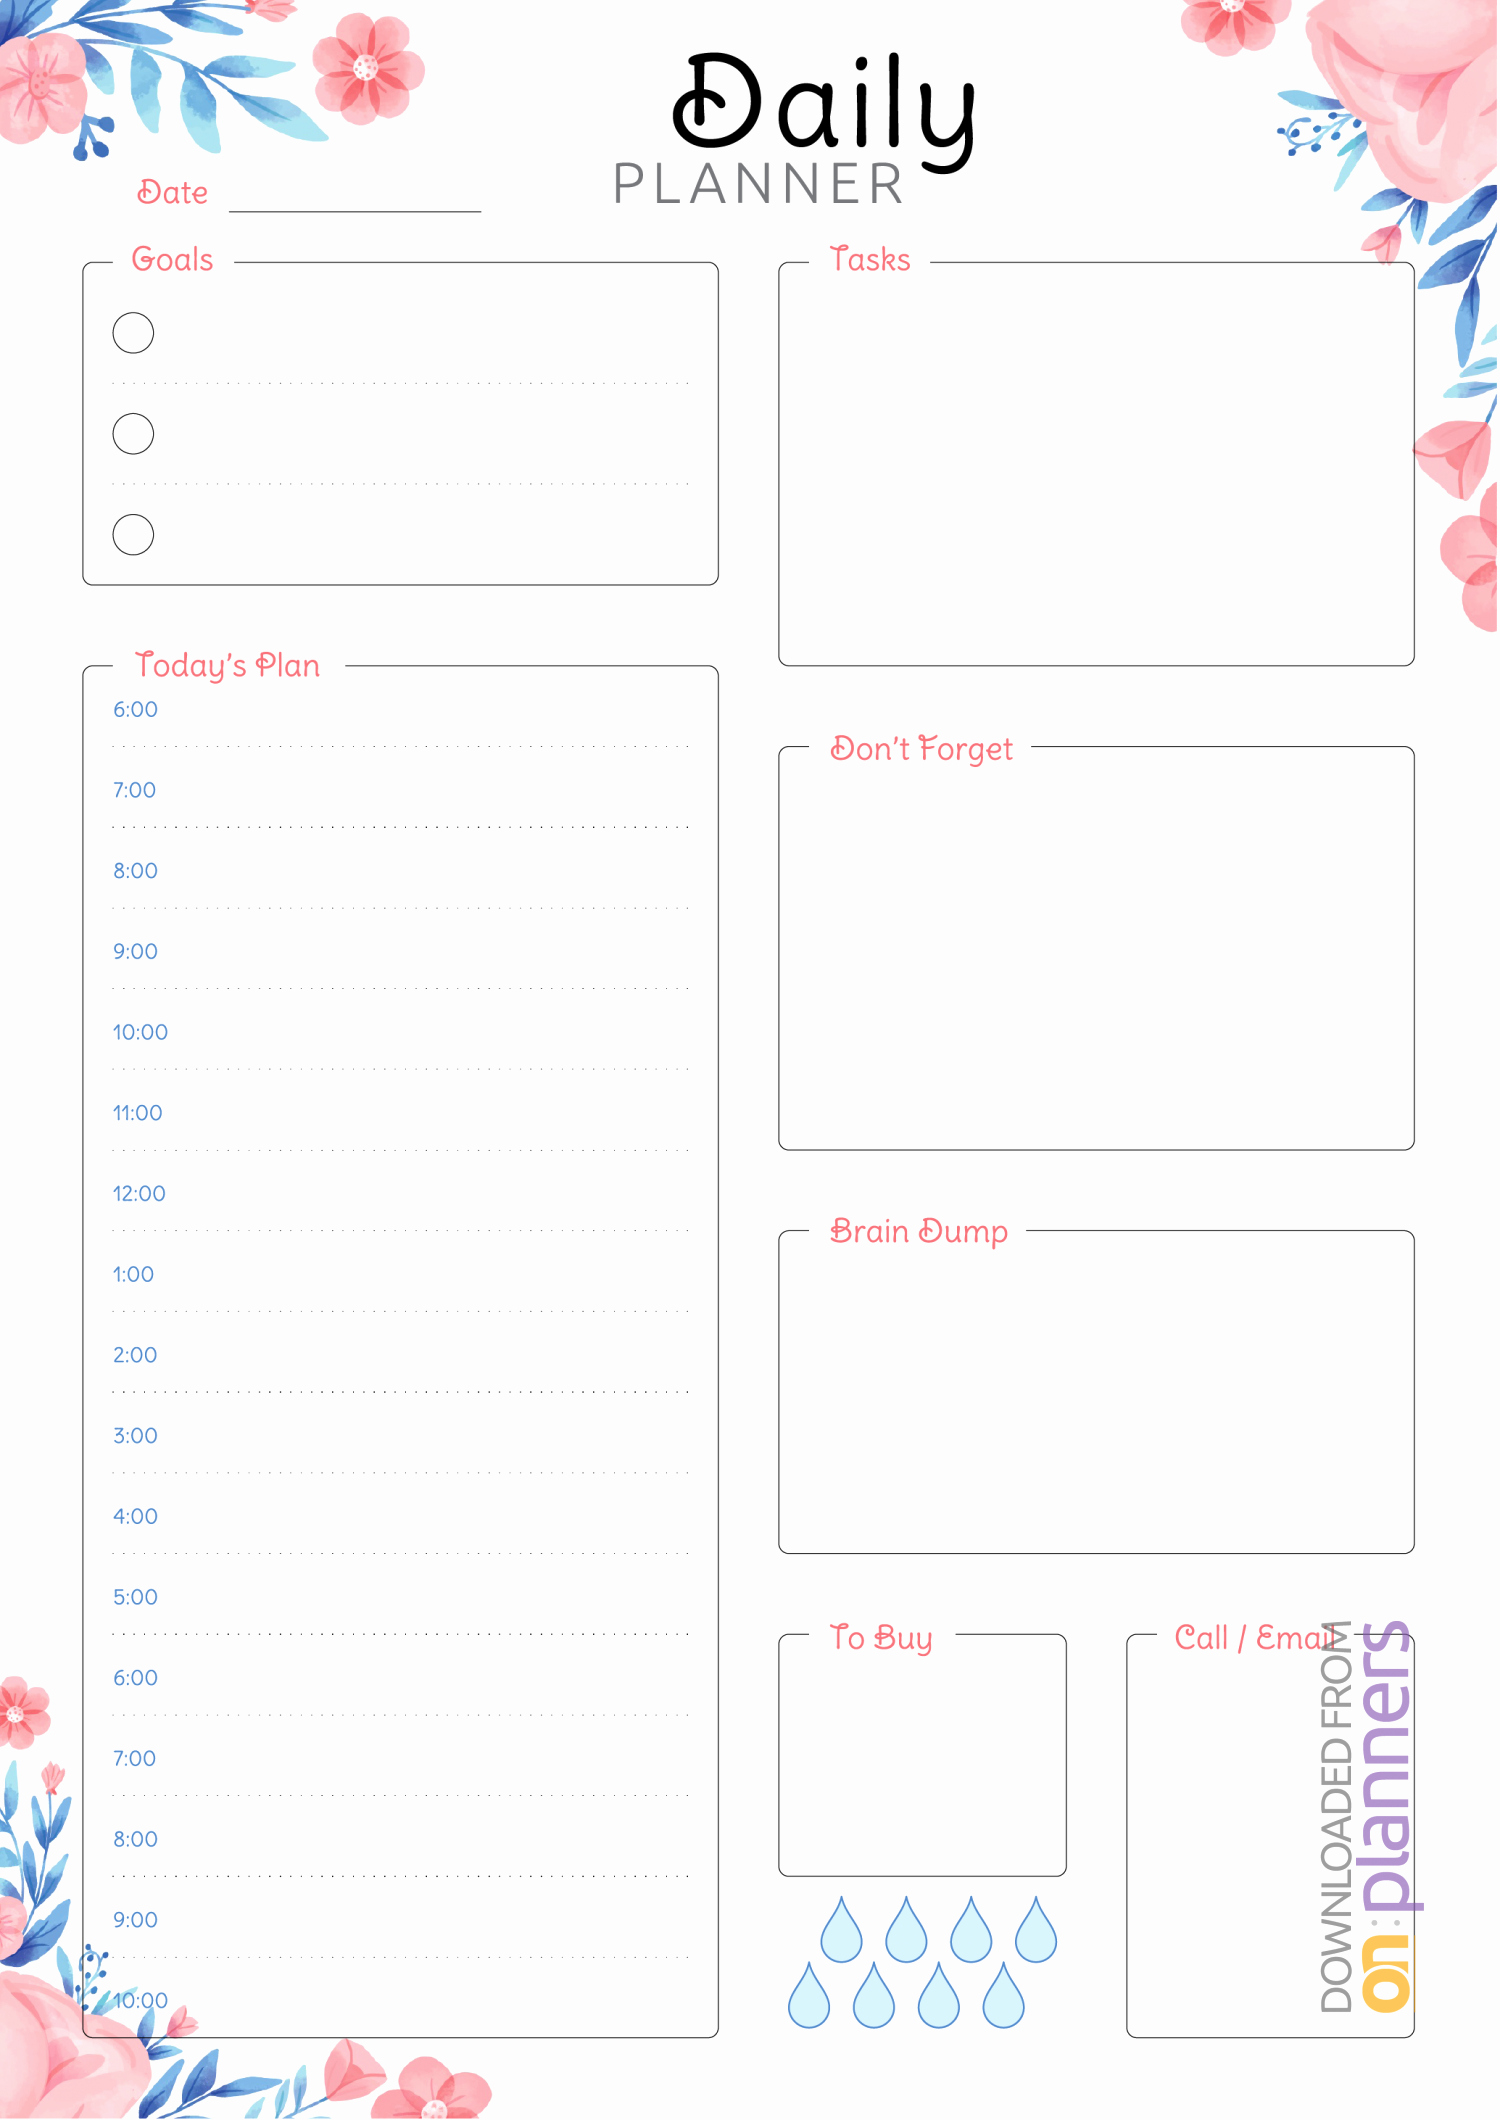 Printable Daily Planner Template Lovely Daily Planner Templates Printable Download Free Pdf